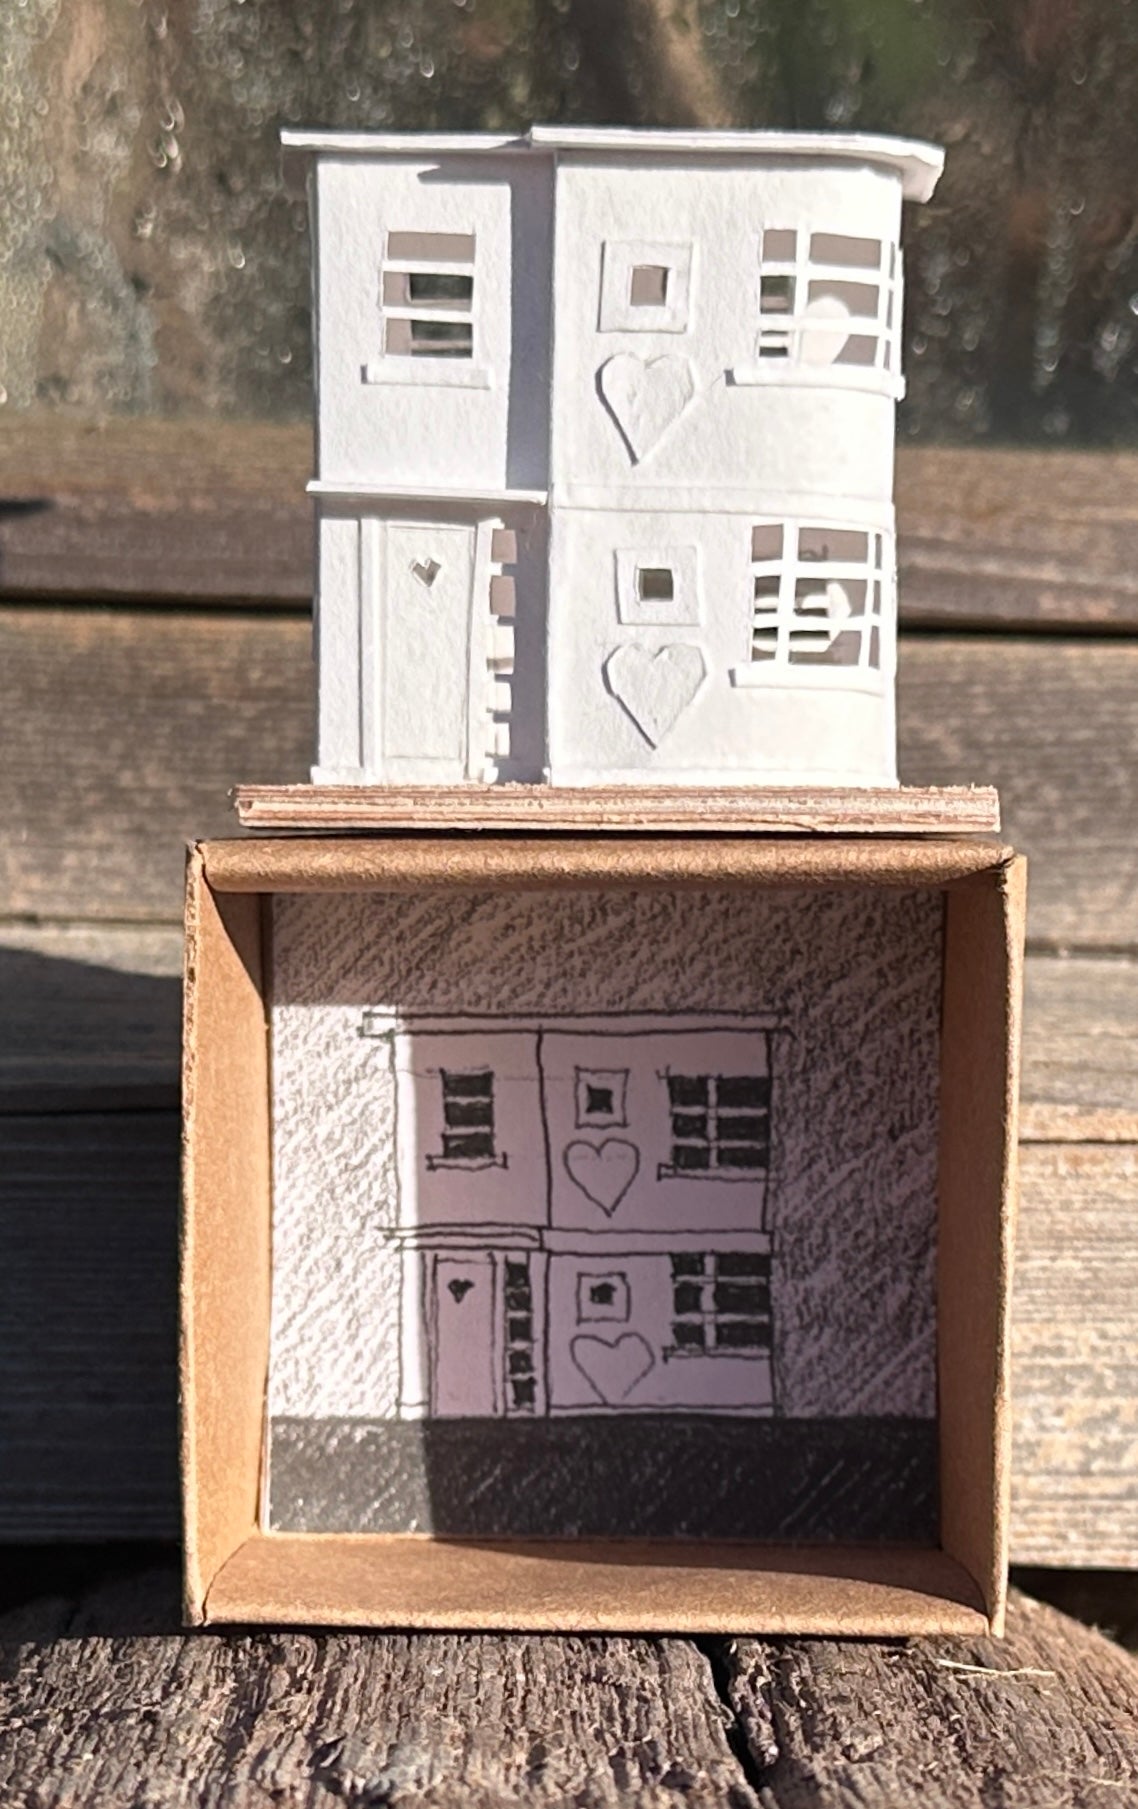 Modern House front elevation of white paper modernist style house with applied hearts on plywood base, standing on presentation box showing pencil drawing on back face.